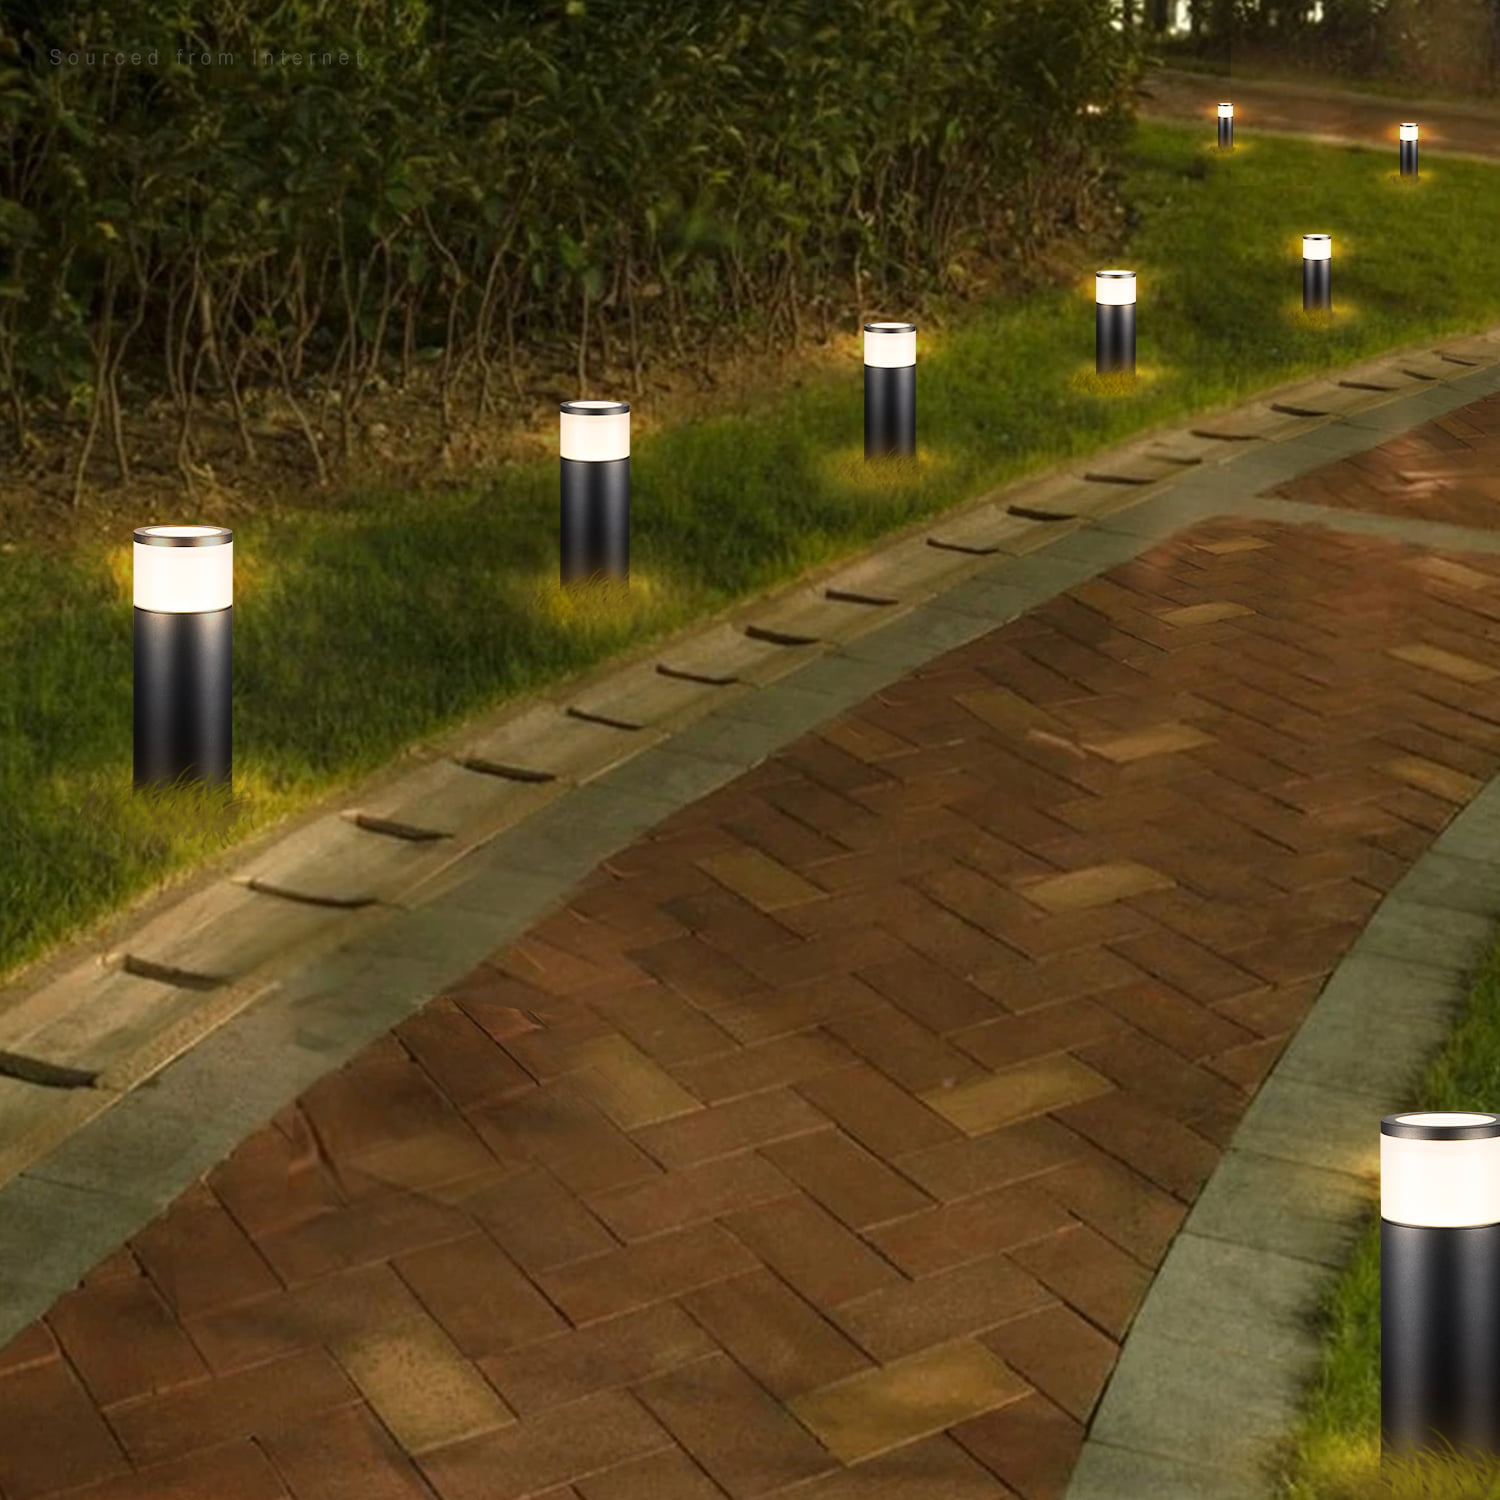 Details about   3 Pc Solar Step Lights,Super Bright LED Walkway Light Stainless Steel White Warm 